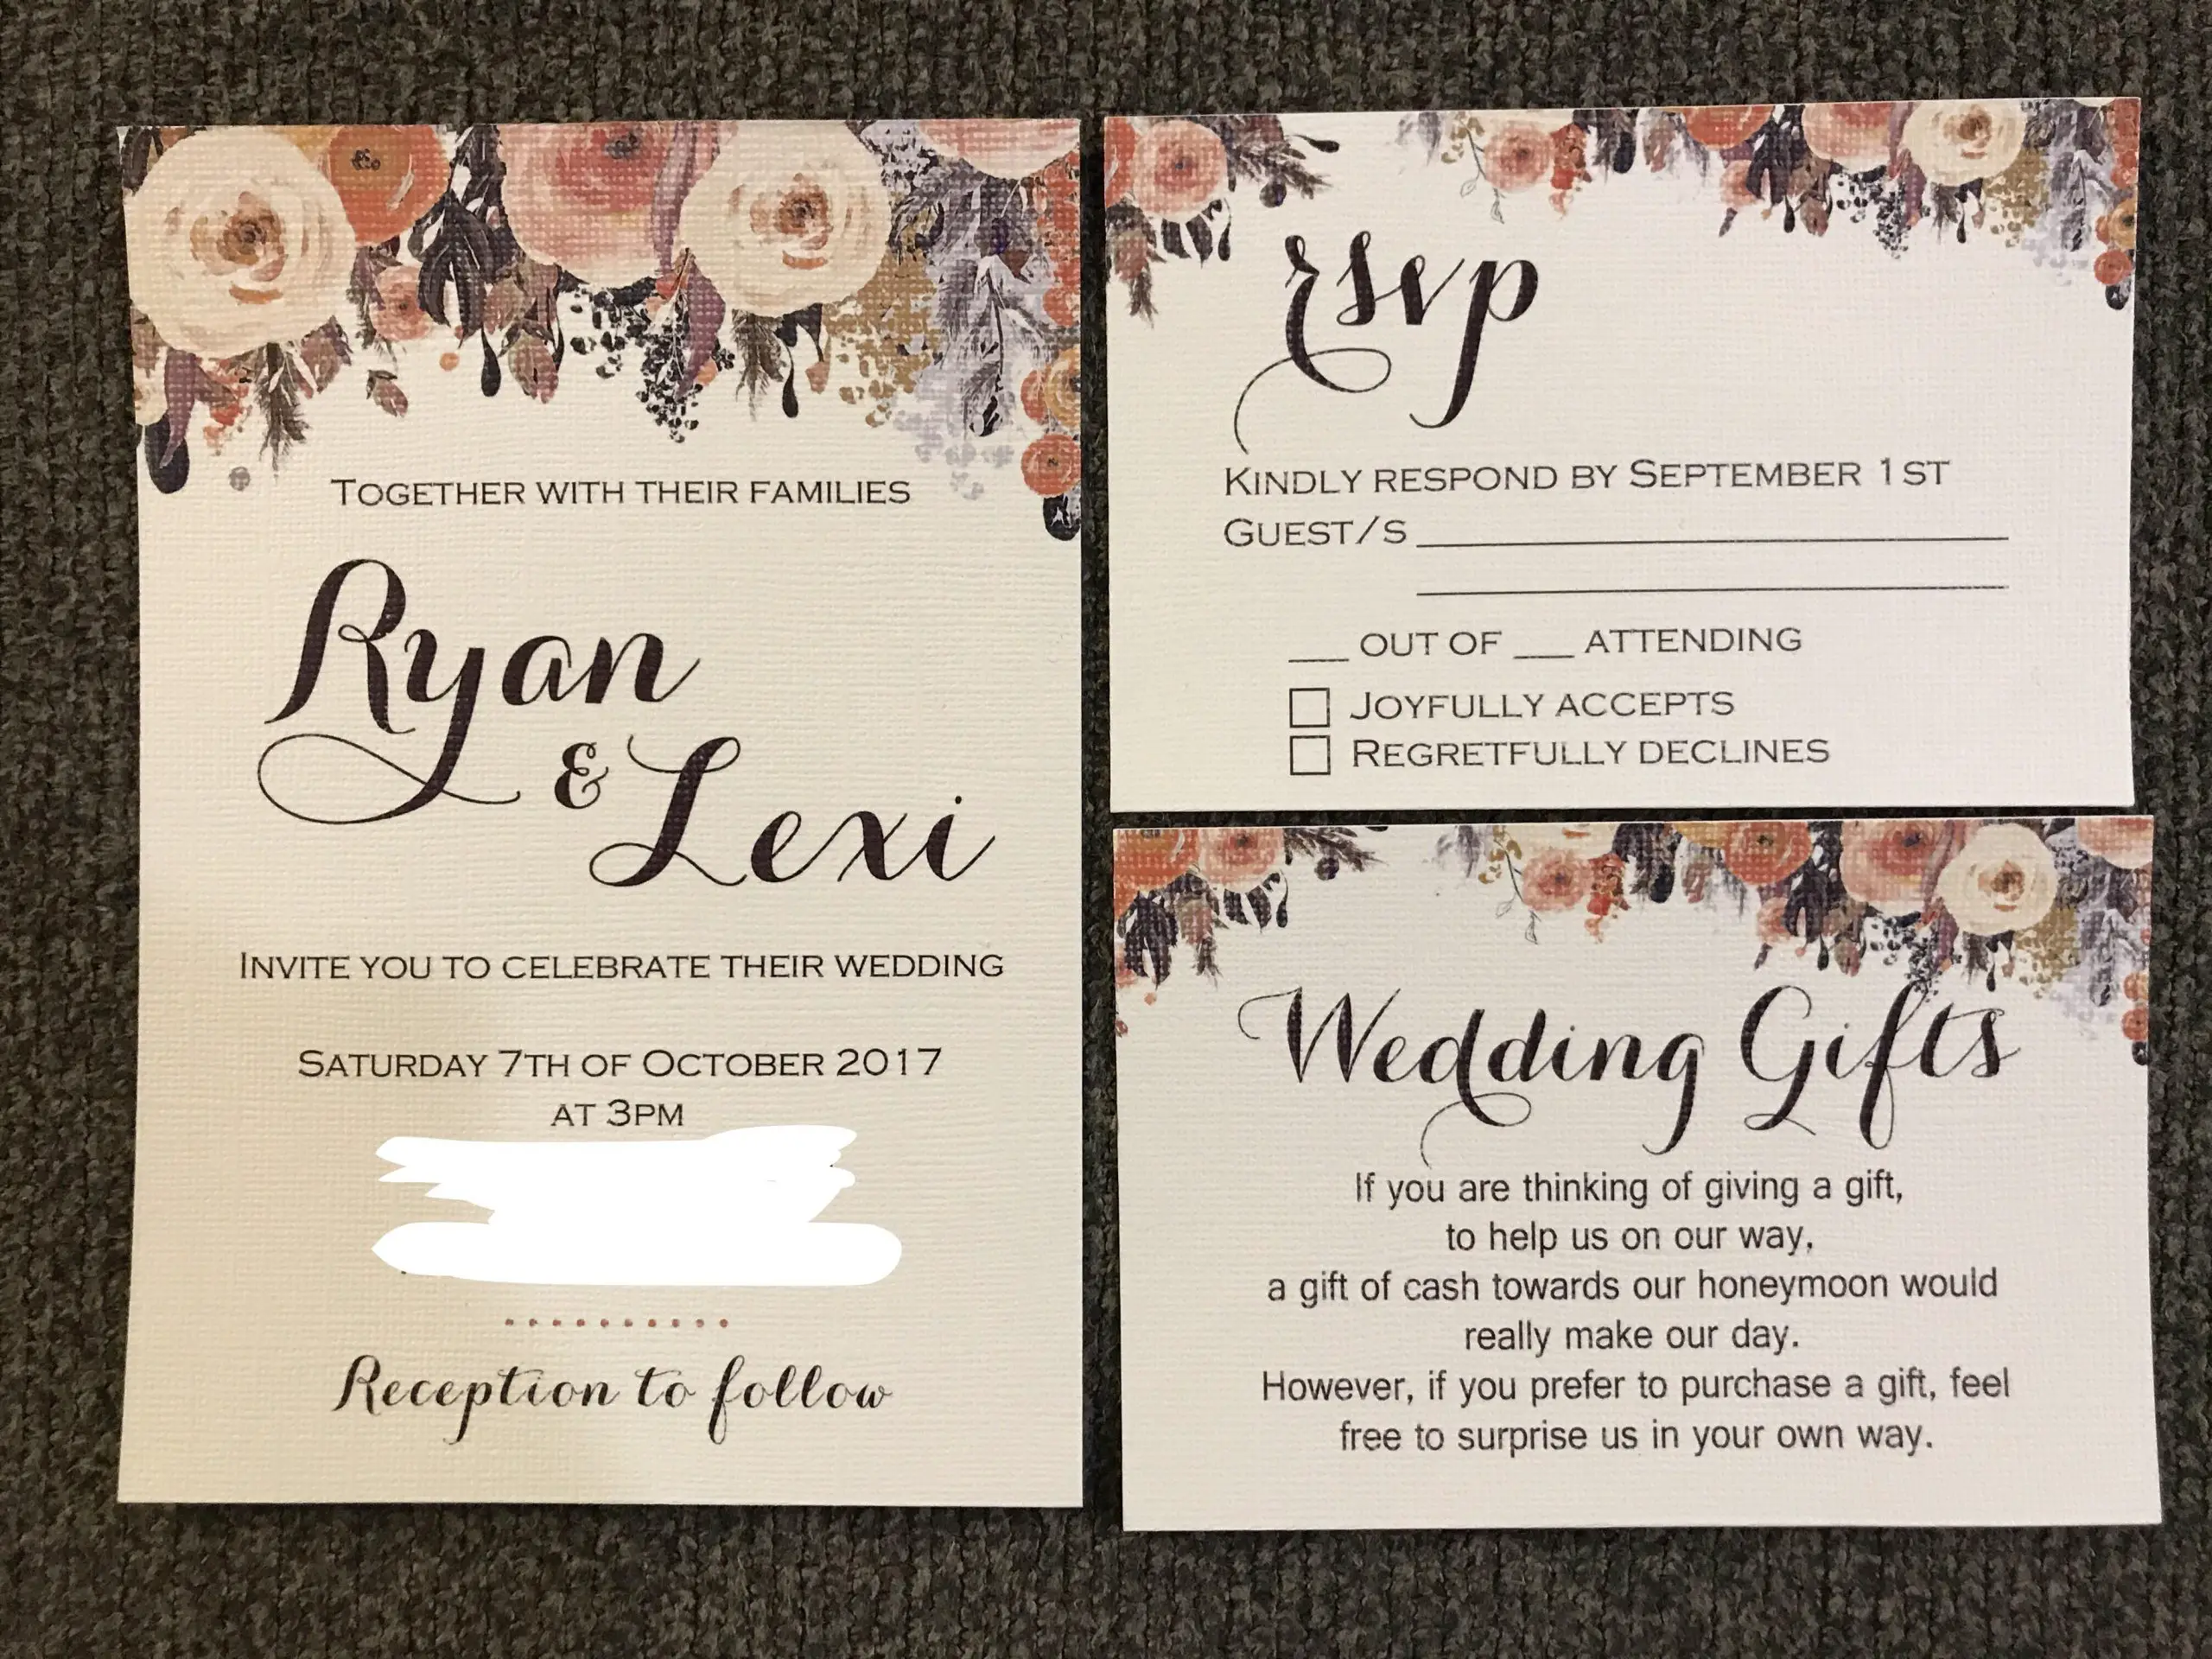 Got the invitations for my fall wedding printed today, safe to say I